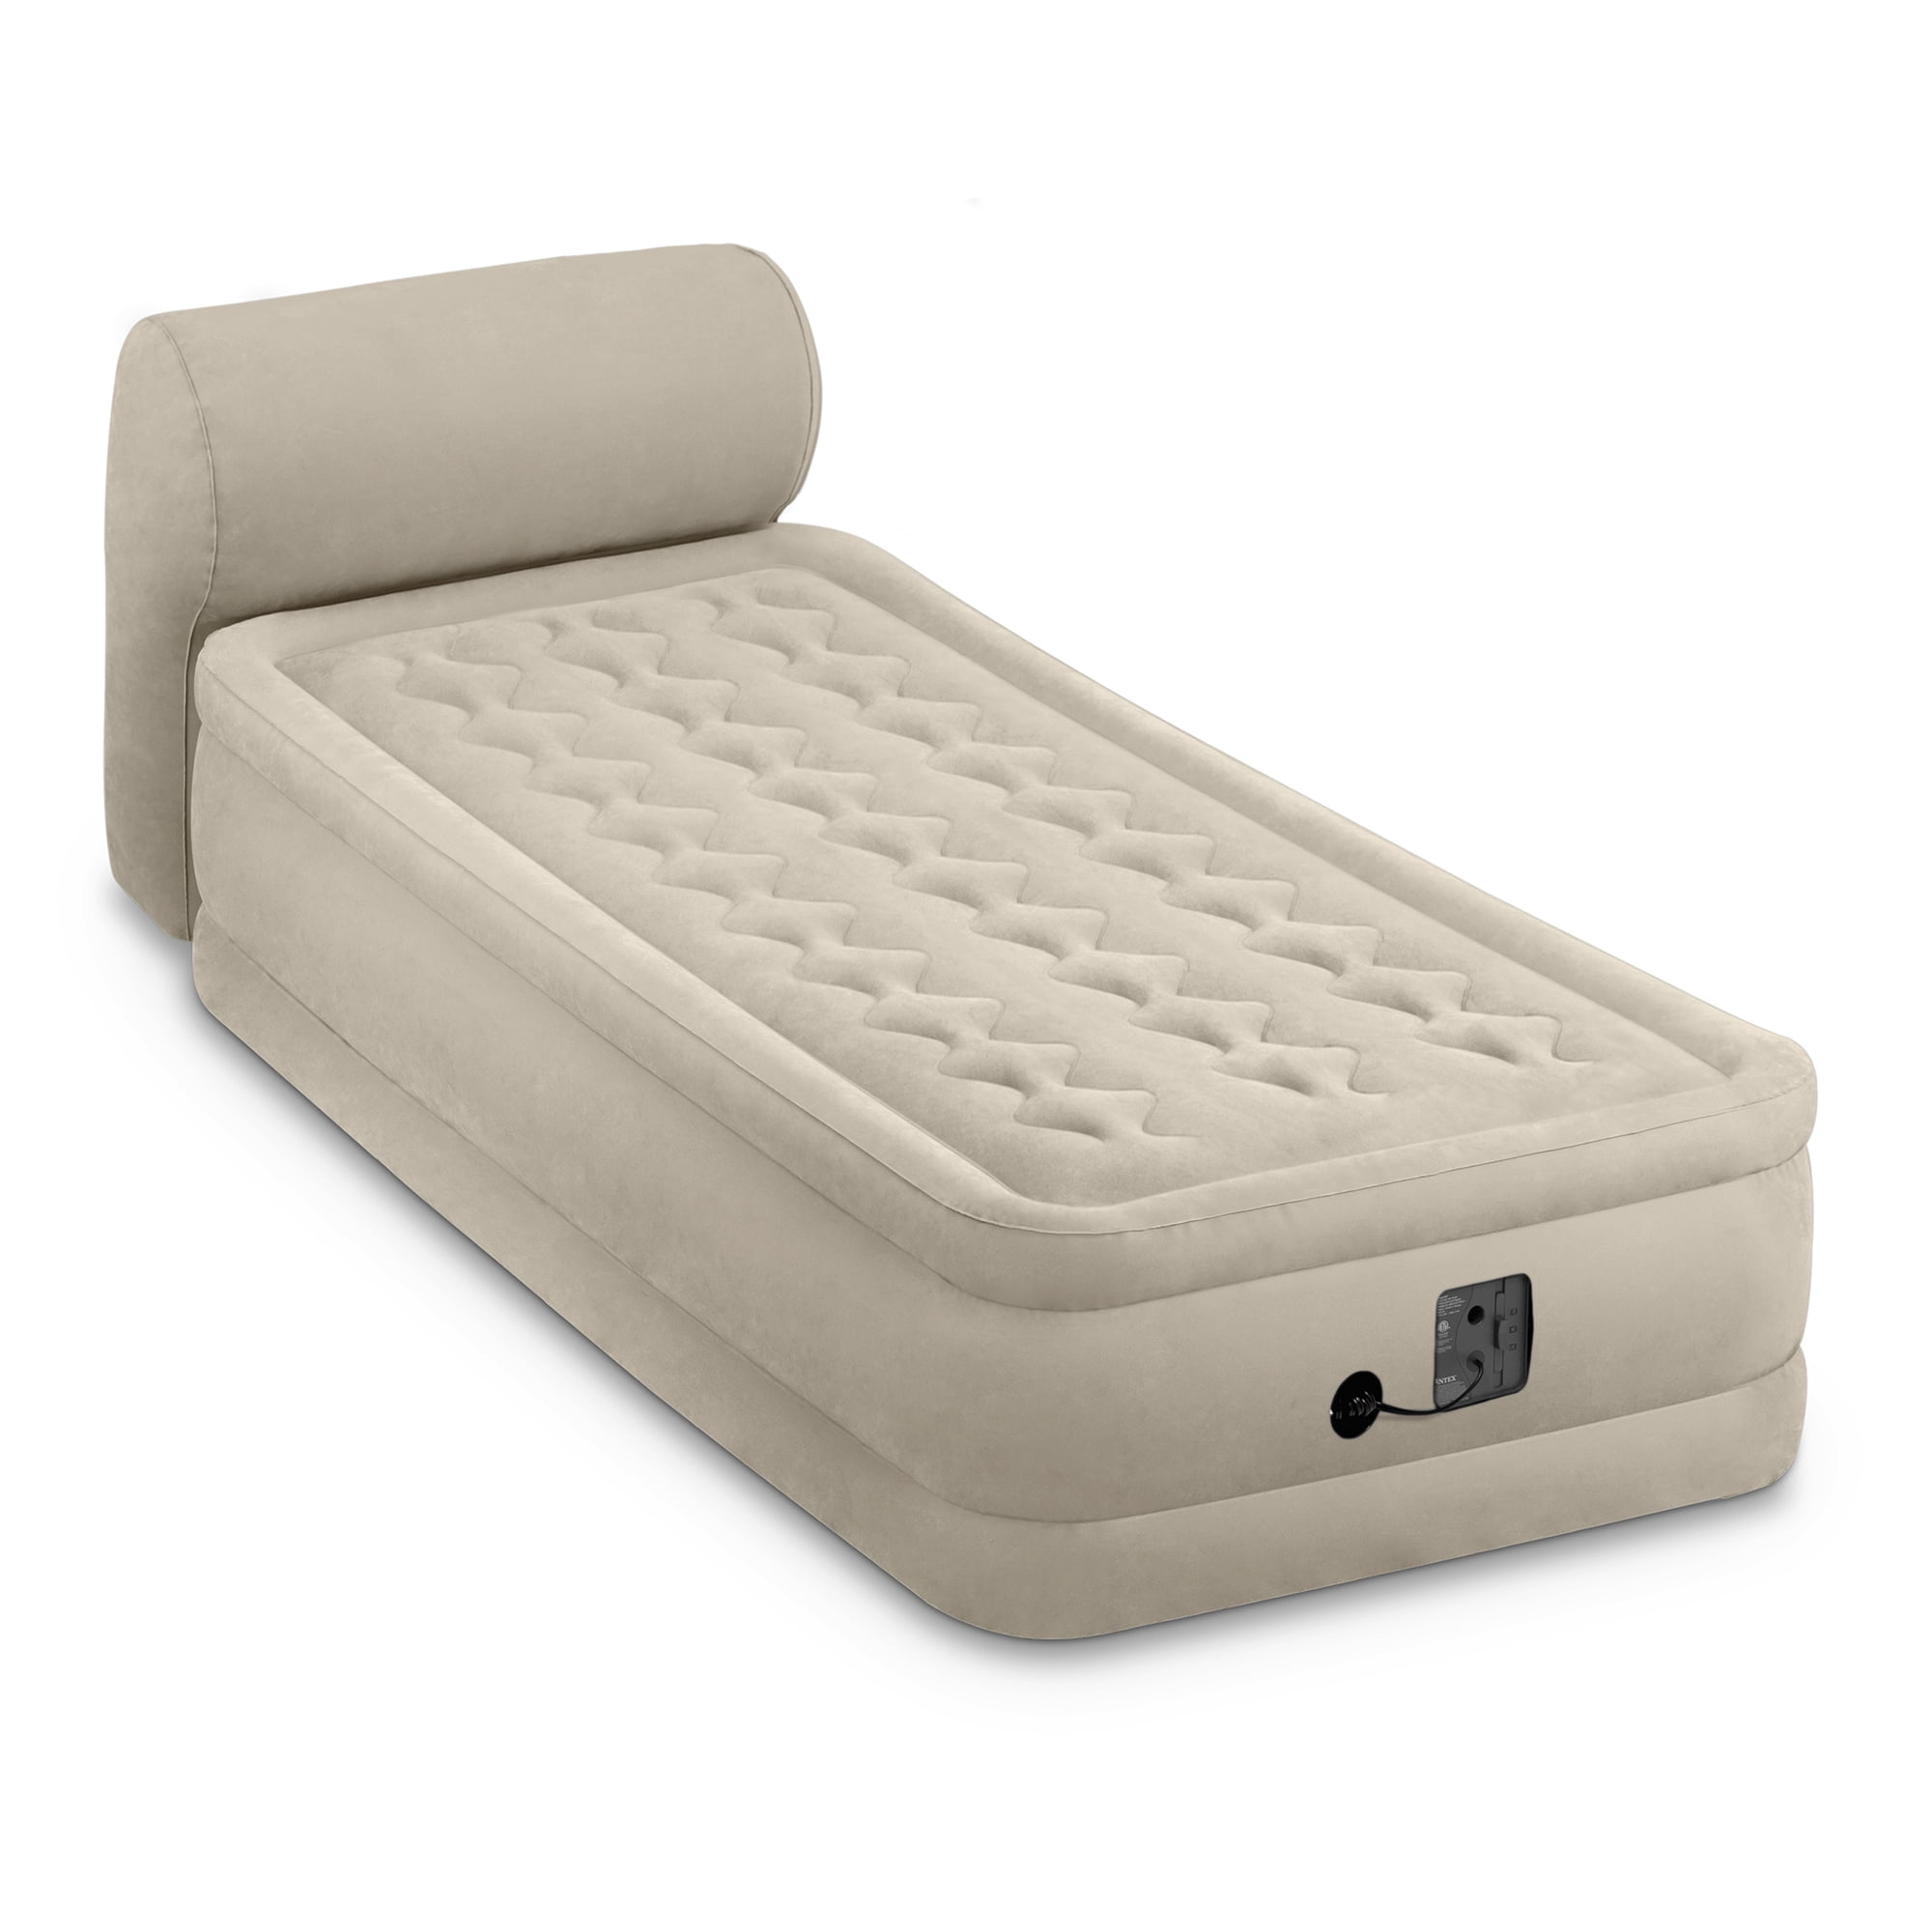 Size Queen for sale online Intex 64447EP Ultra Plush Deluxe Air Mattress with Pump and Headboard 